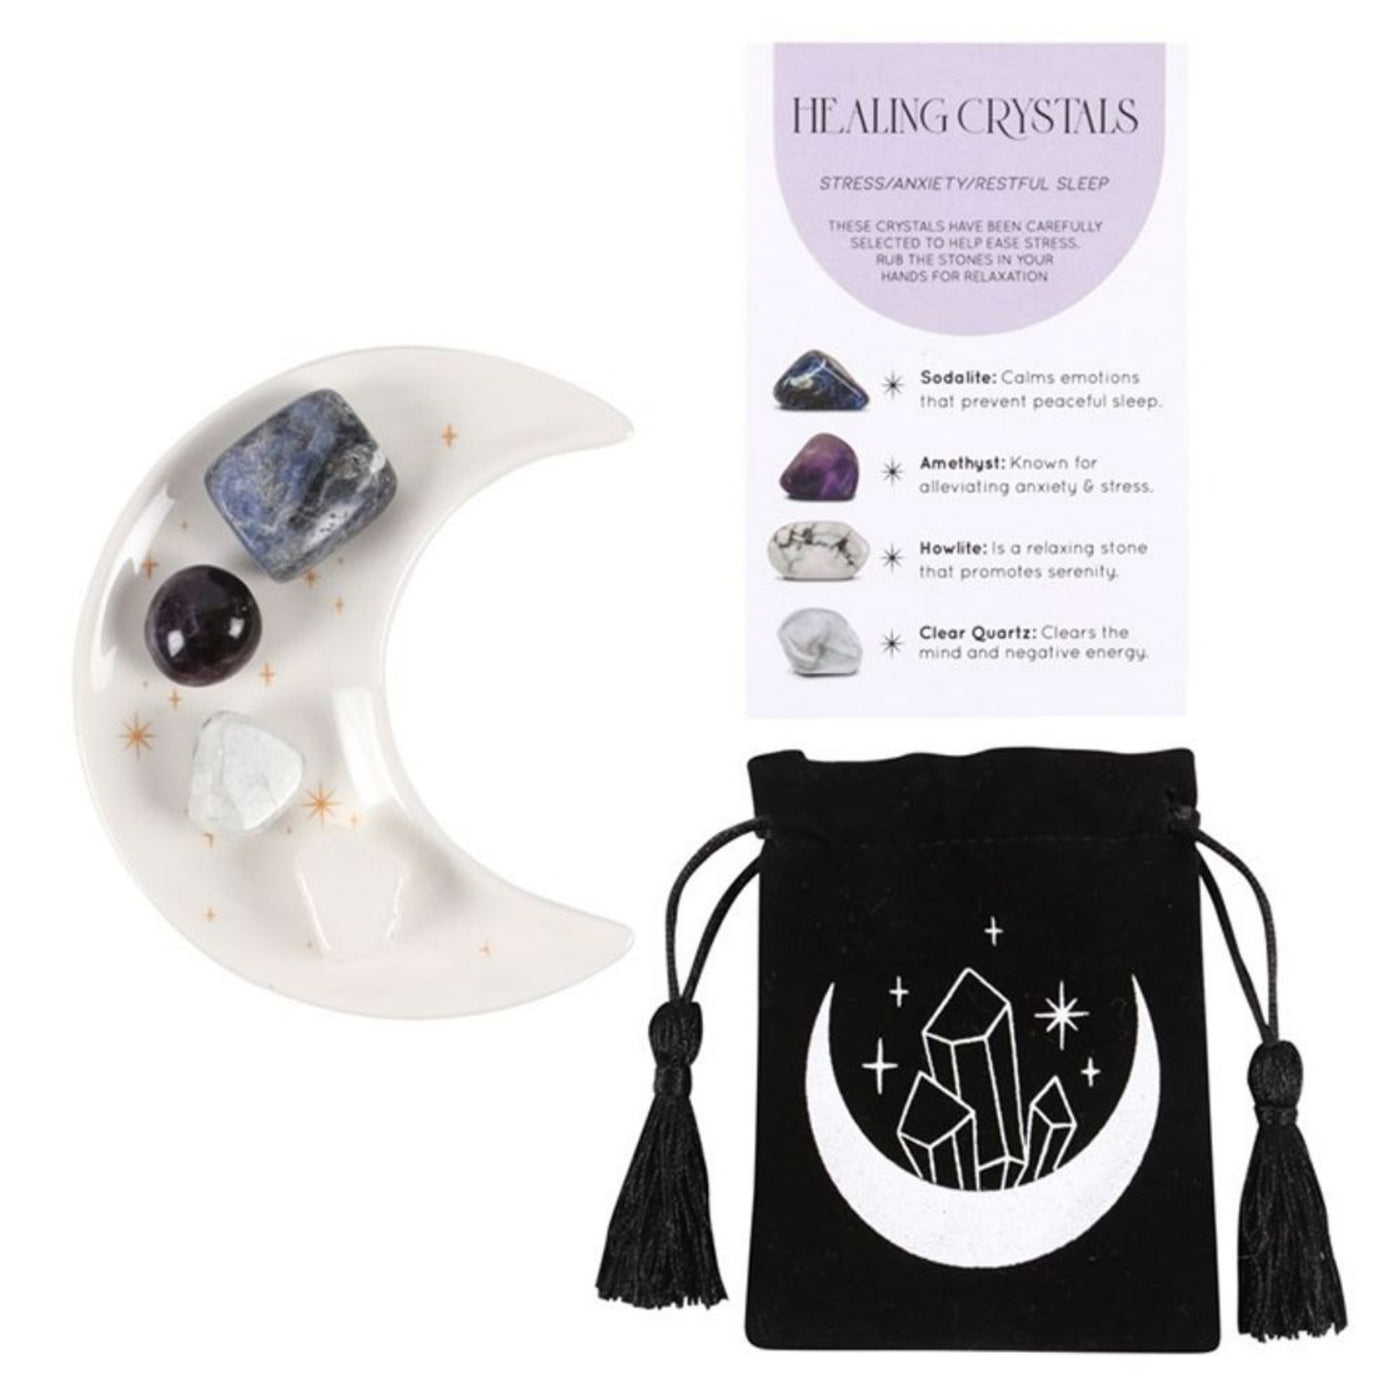 Stress Healing Crystal Set With Moon Trinket Dish Gift With Four Crystals.